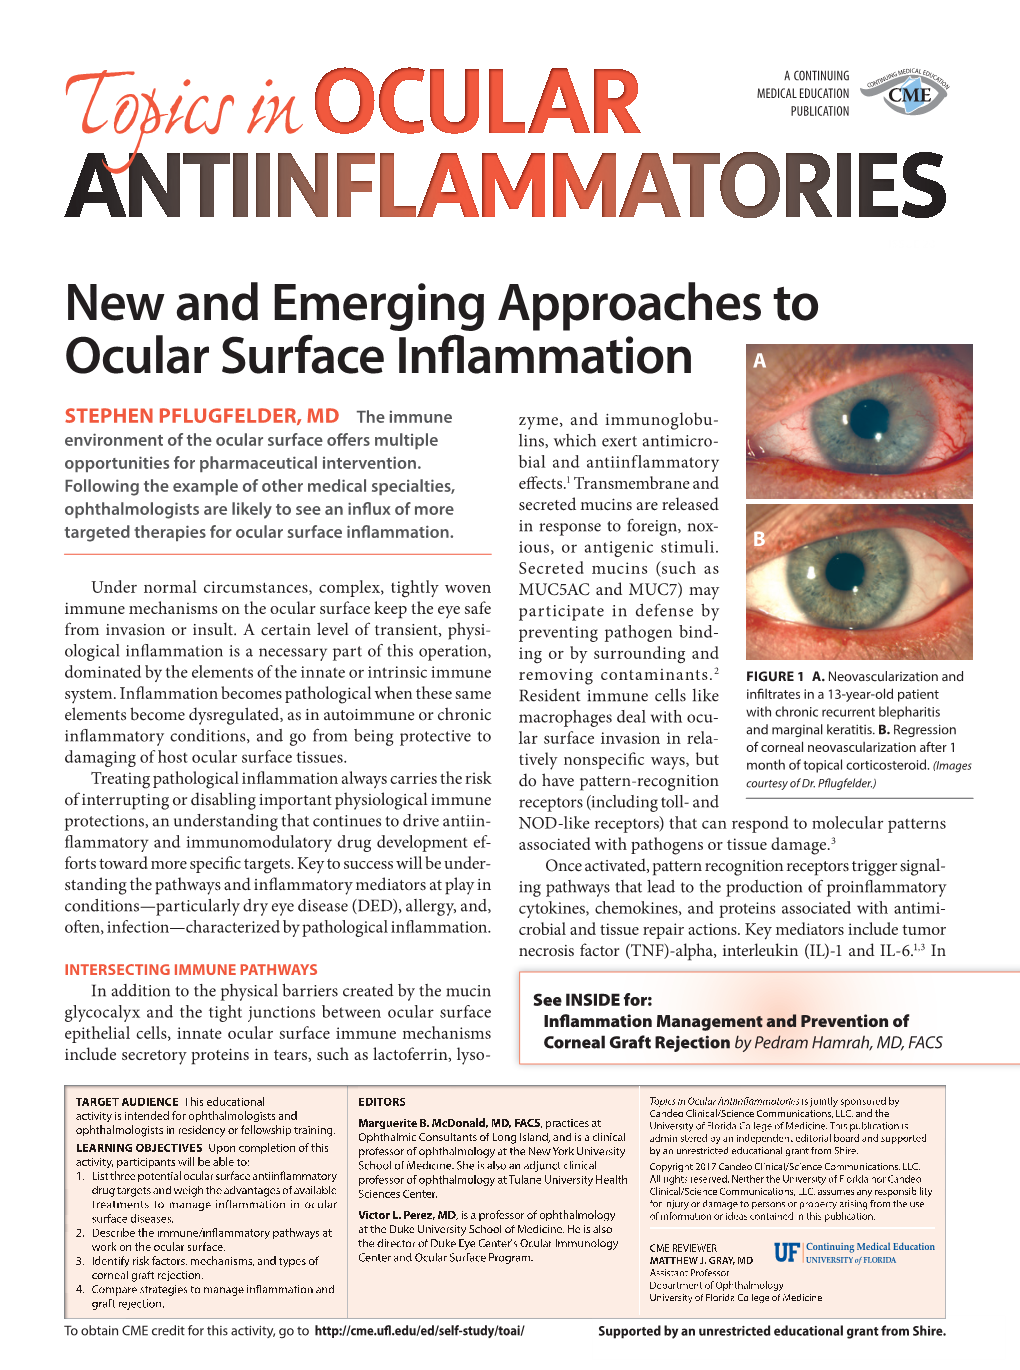 New and Emerging Approaches to Ocular Surface Inflammation